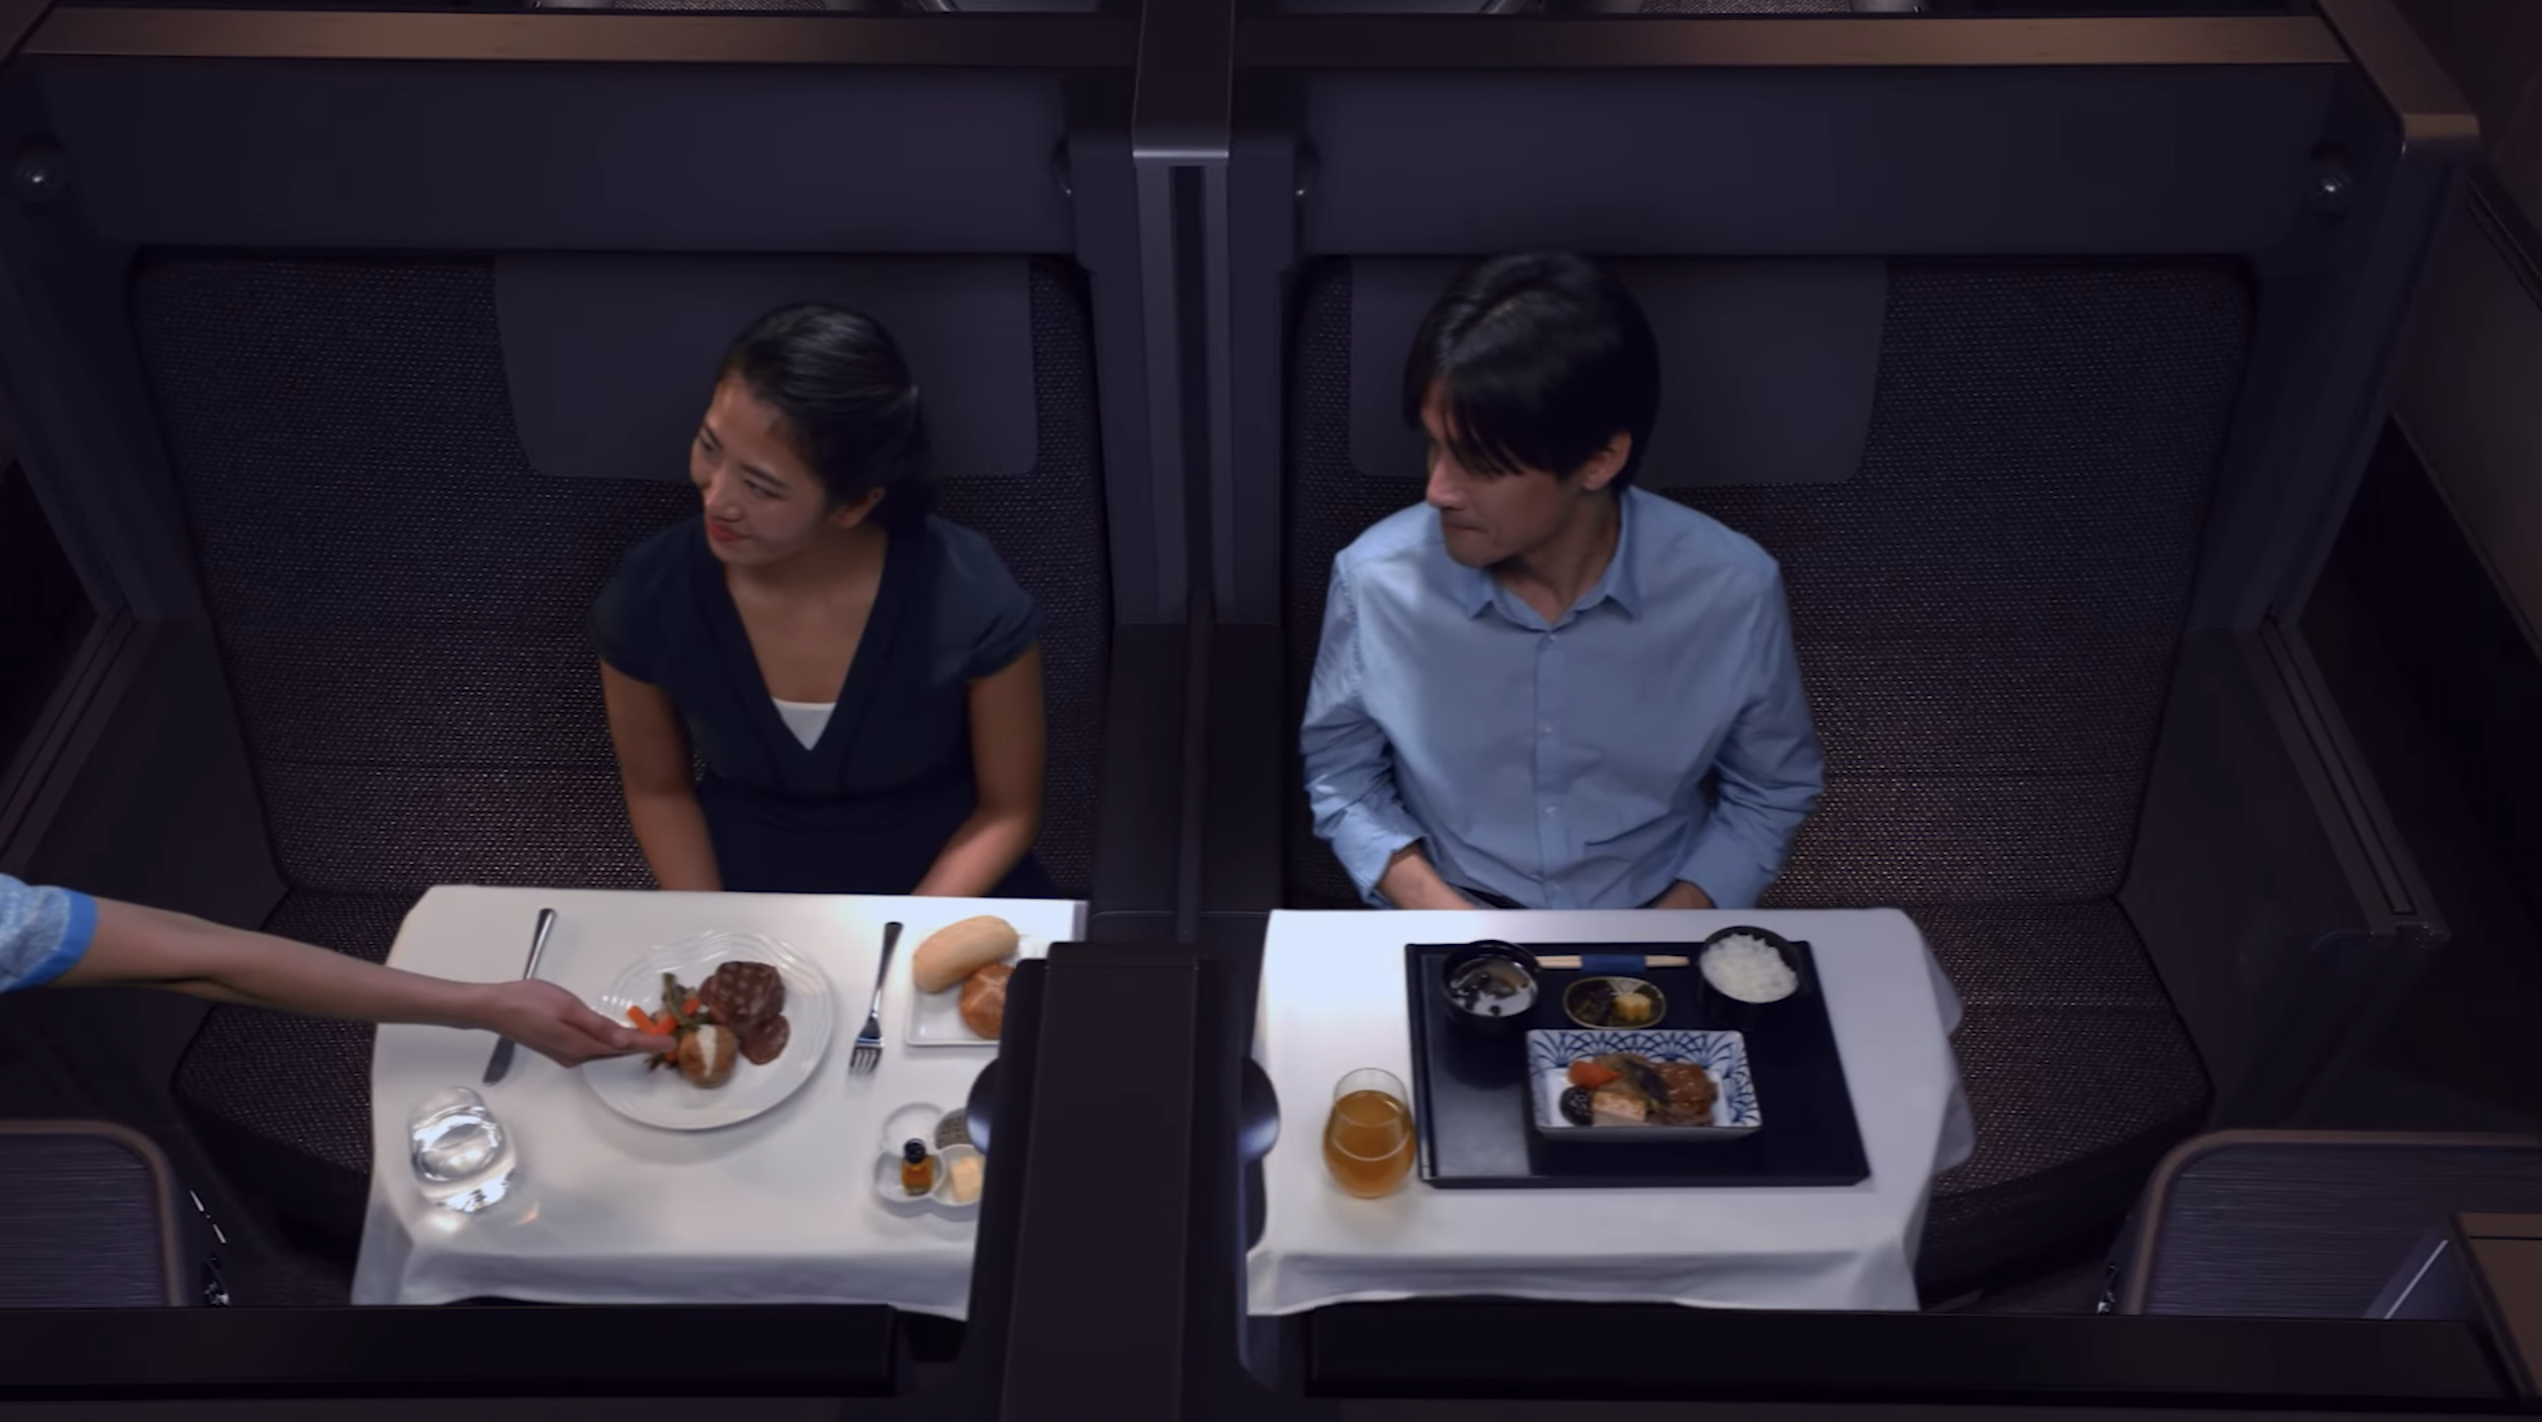 New ANA Business Class The Room on their 777-300ER dining